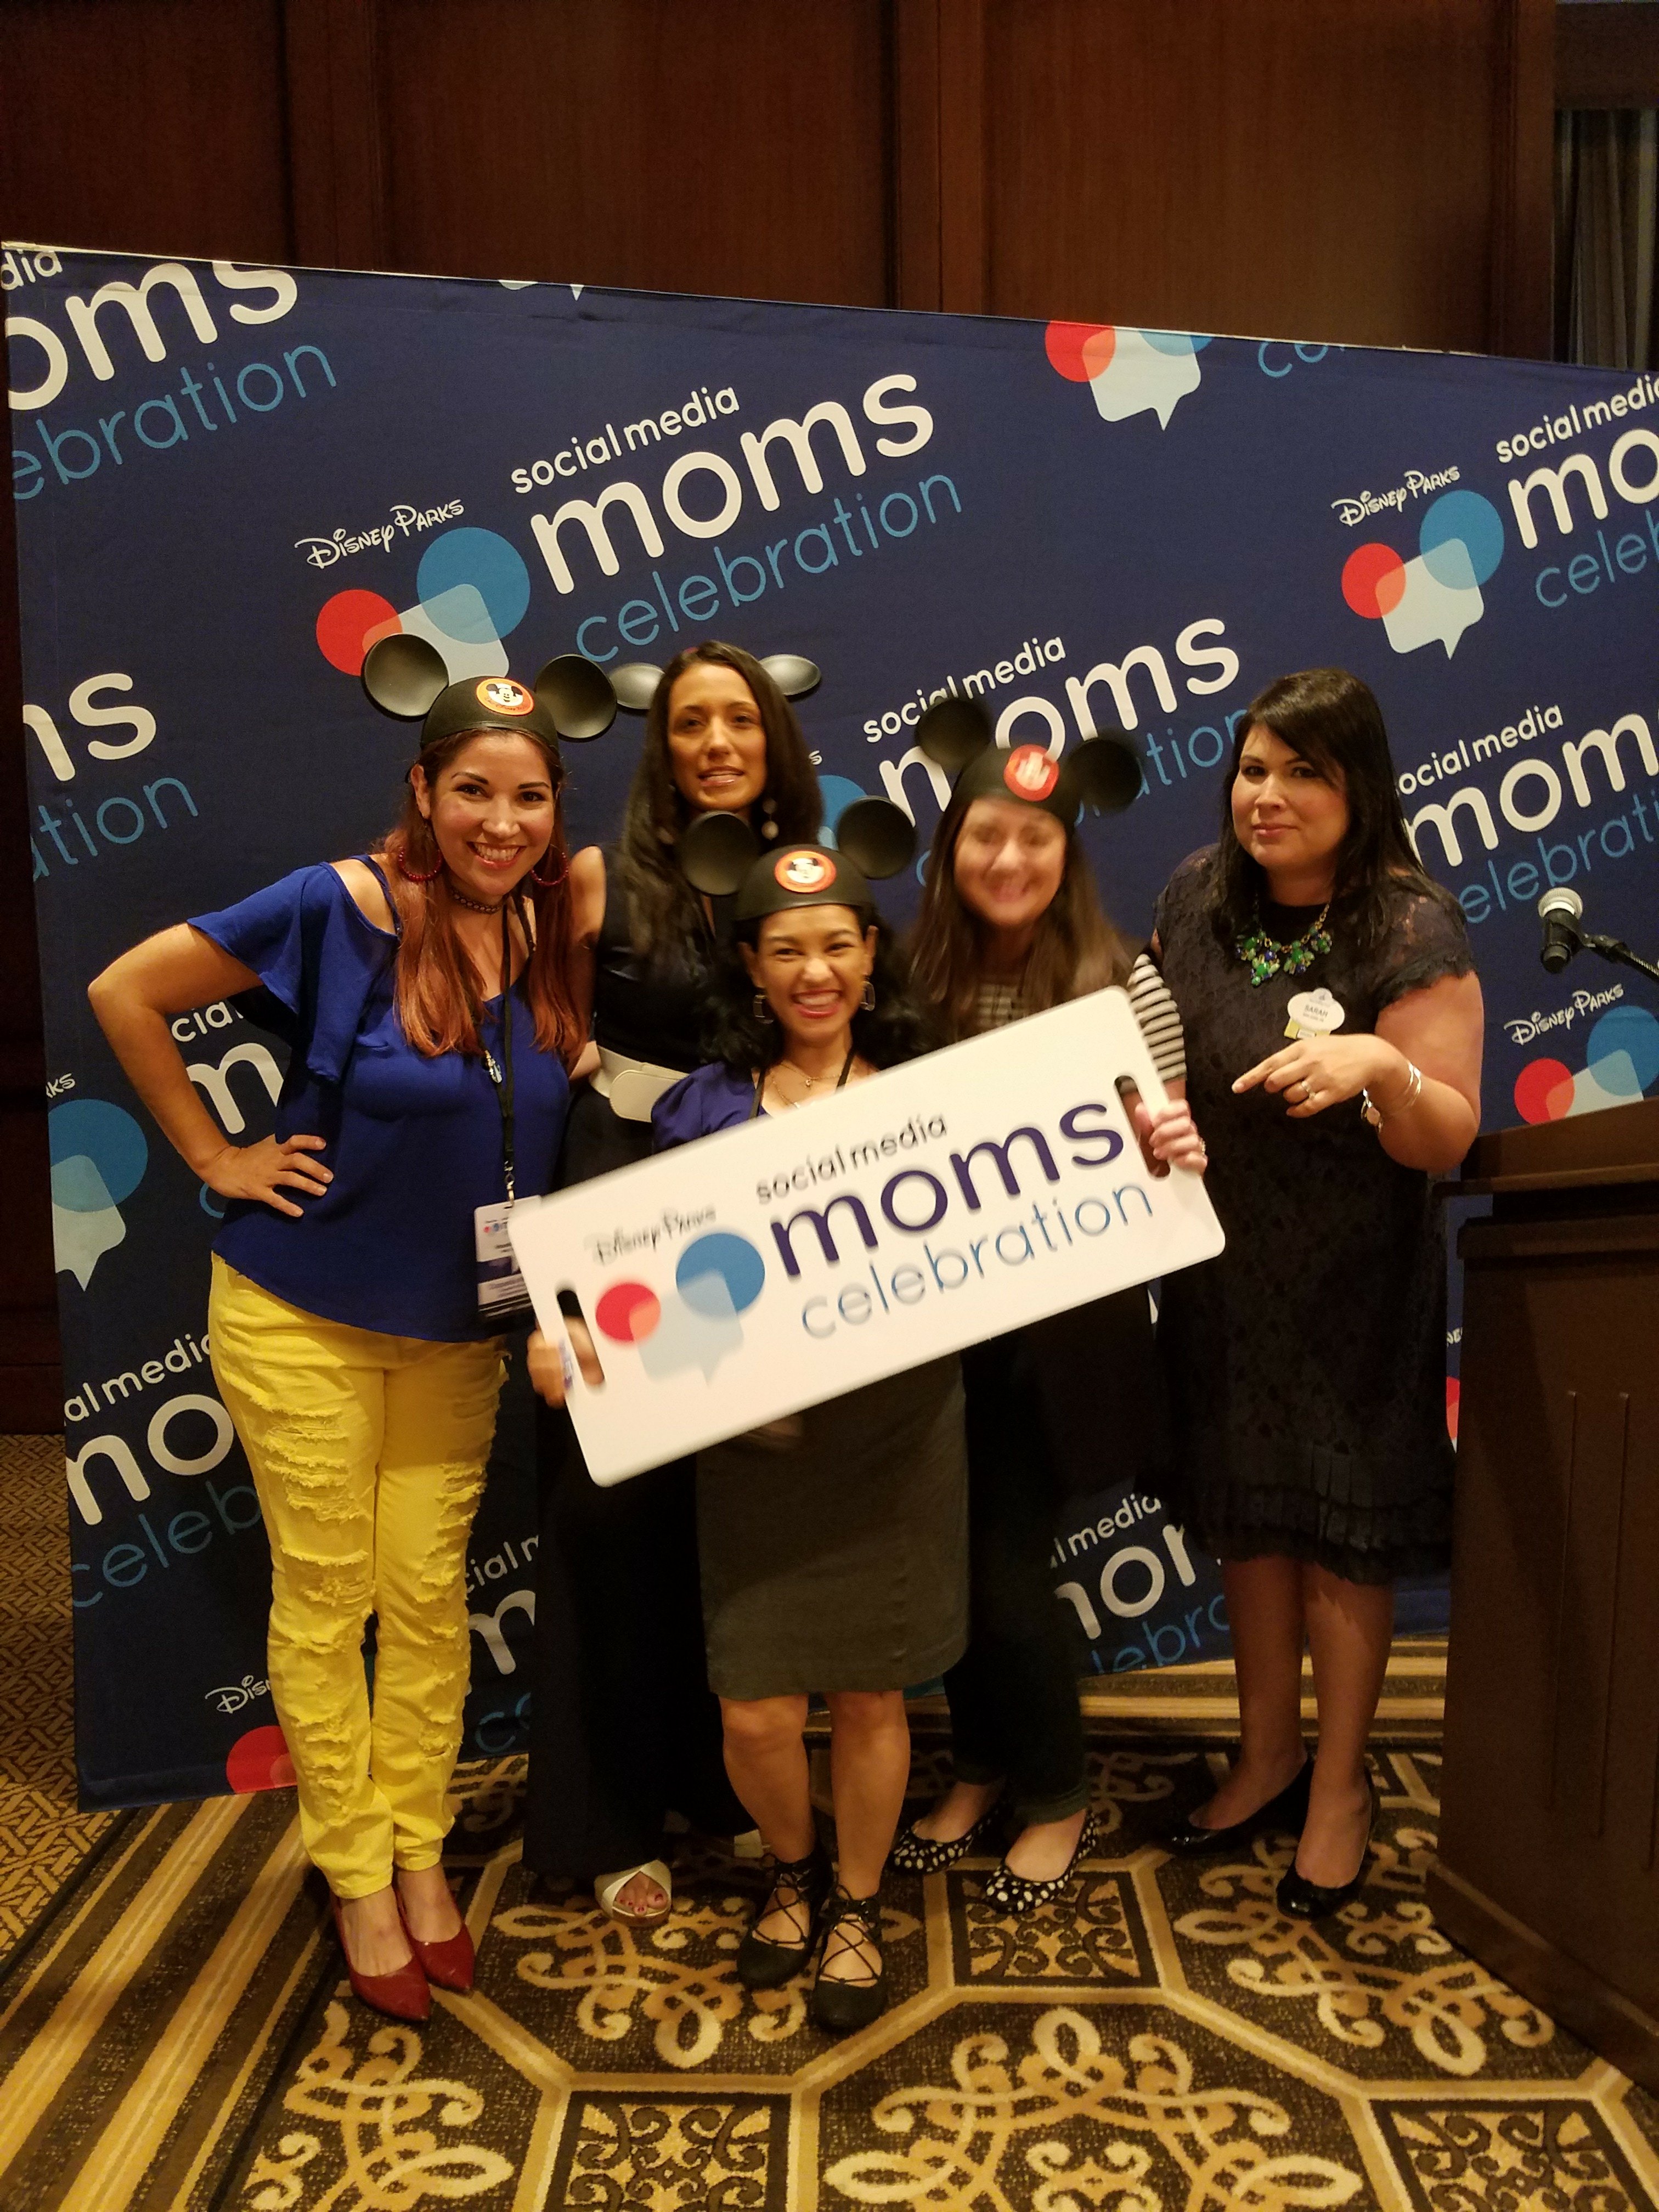 Coppelia and her blogger friends Amanda, Elayna, Val and Sarah at the Disney Social Media Moms Celebration in Houston!